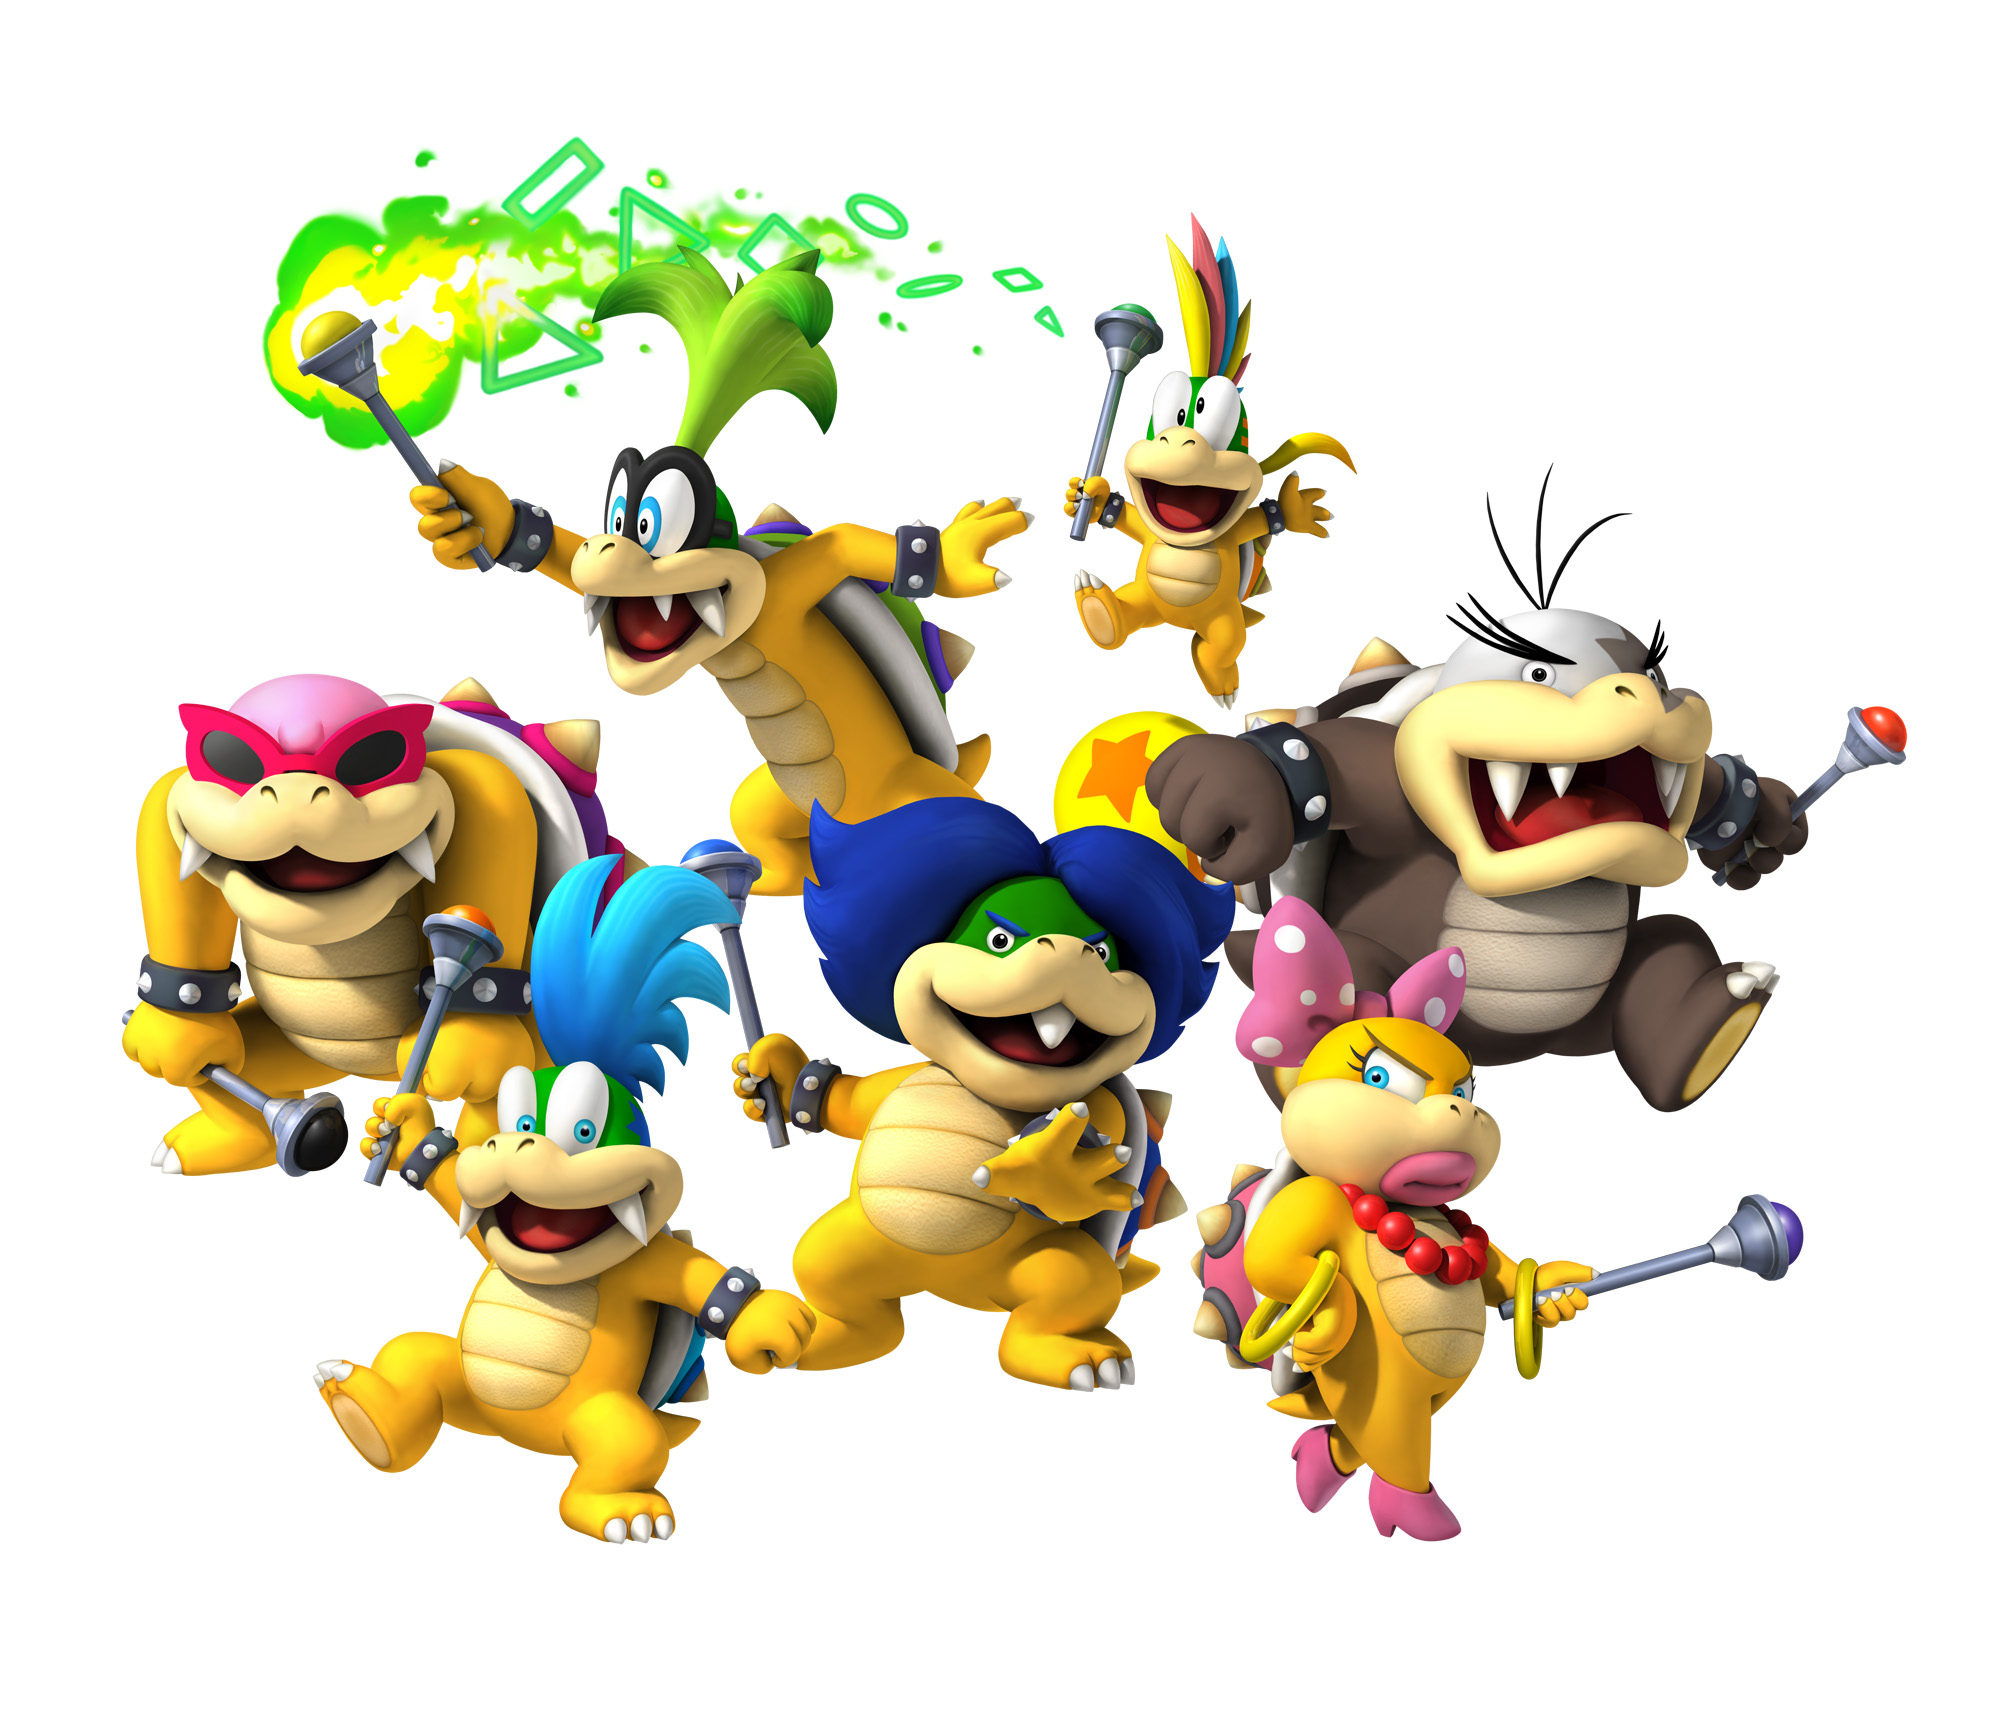 Check out the Koopalings in New Super Mario Bros. Wii